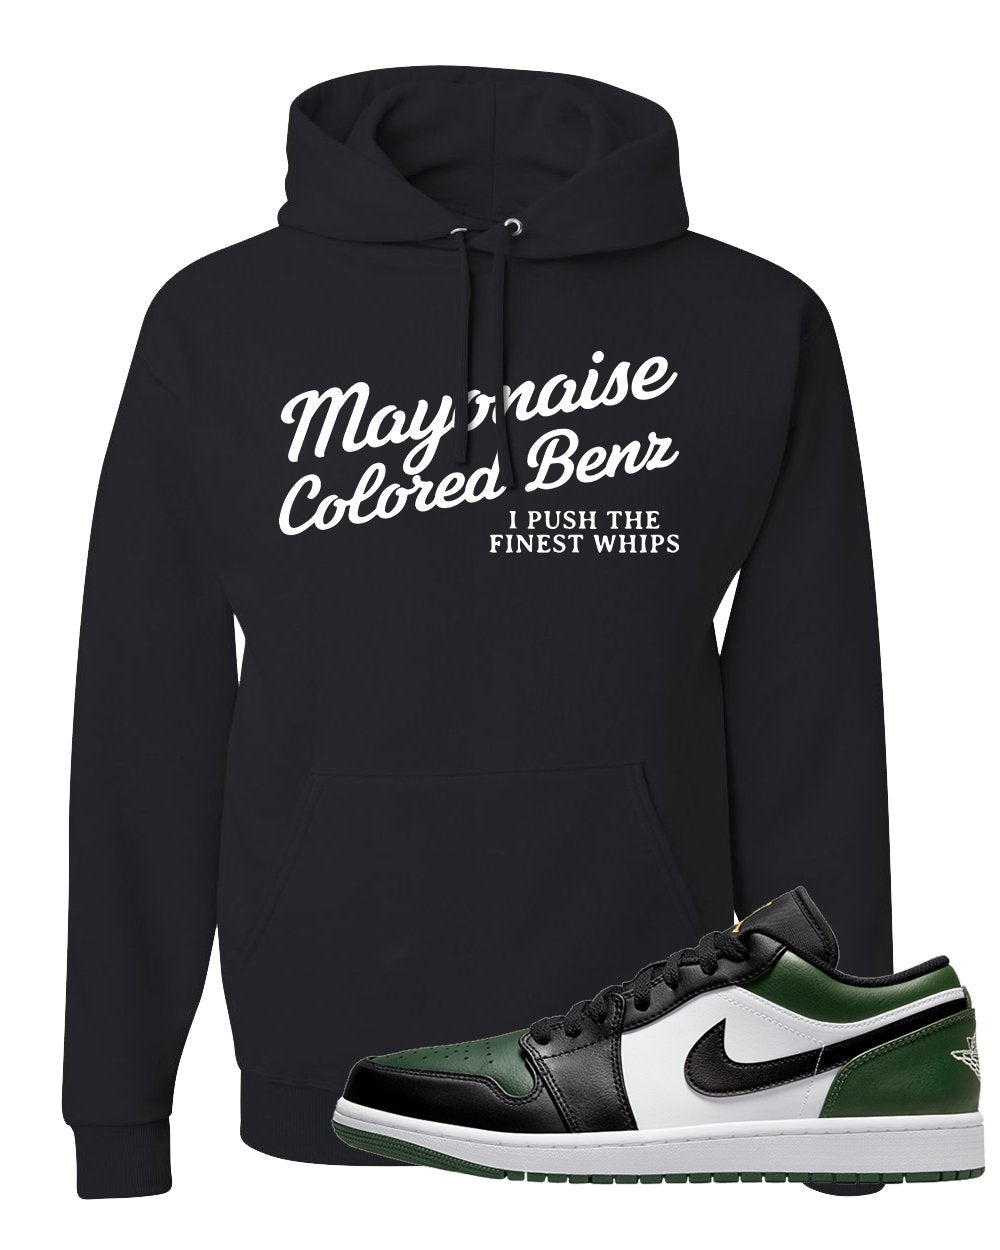 Green Toe Low 1s Hoodie | Mayonaise Colored Benz, Black